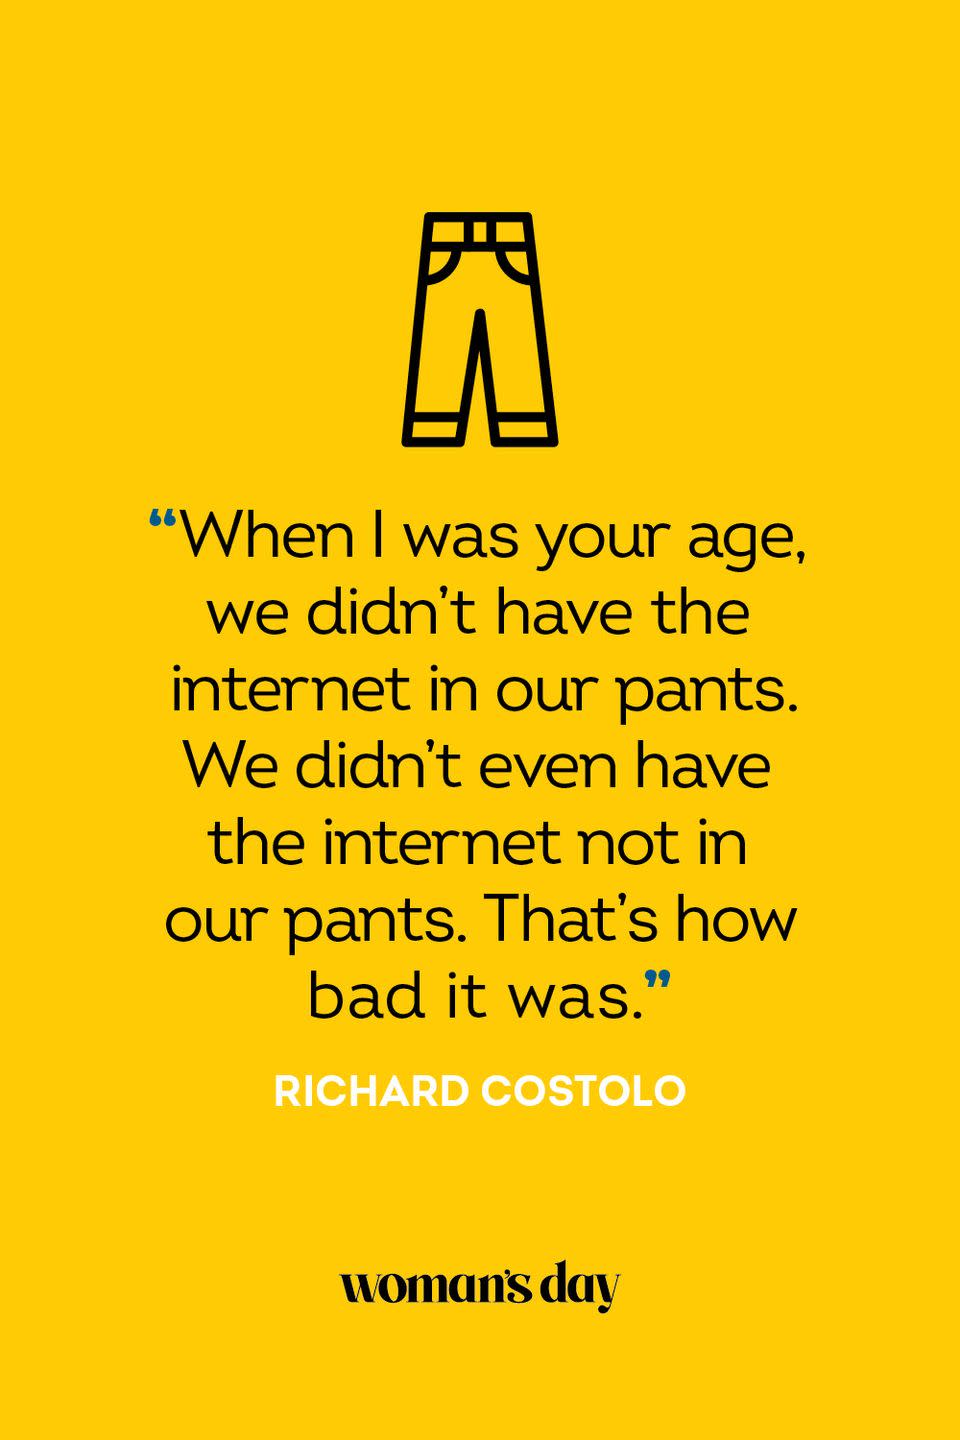 <p>“When I was your age, we didn’t have the internet in our pants. We didn’t even have the internet not in our pants. That’s how bad it was.”</p>